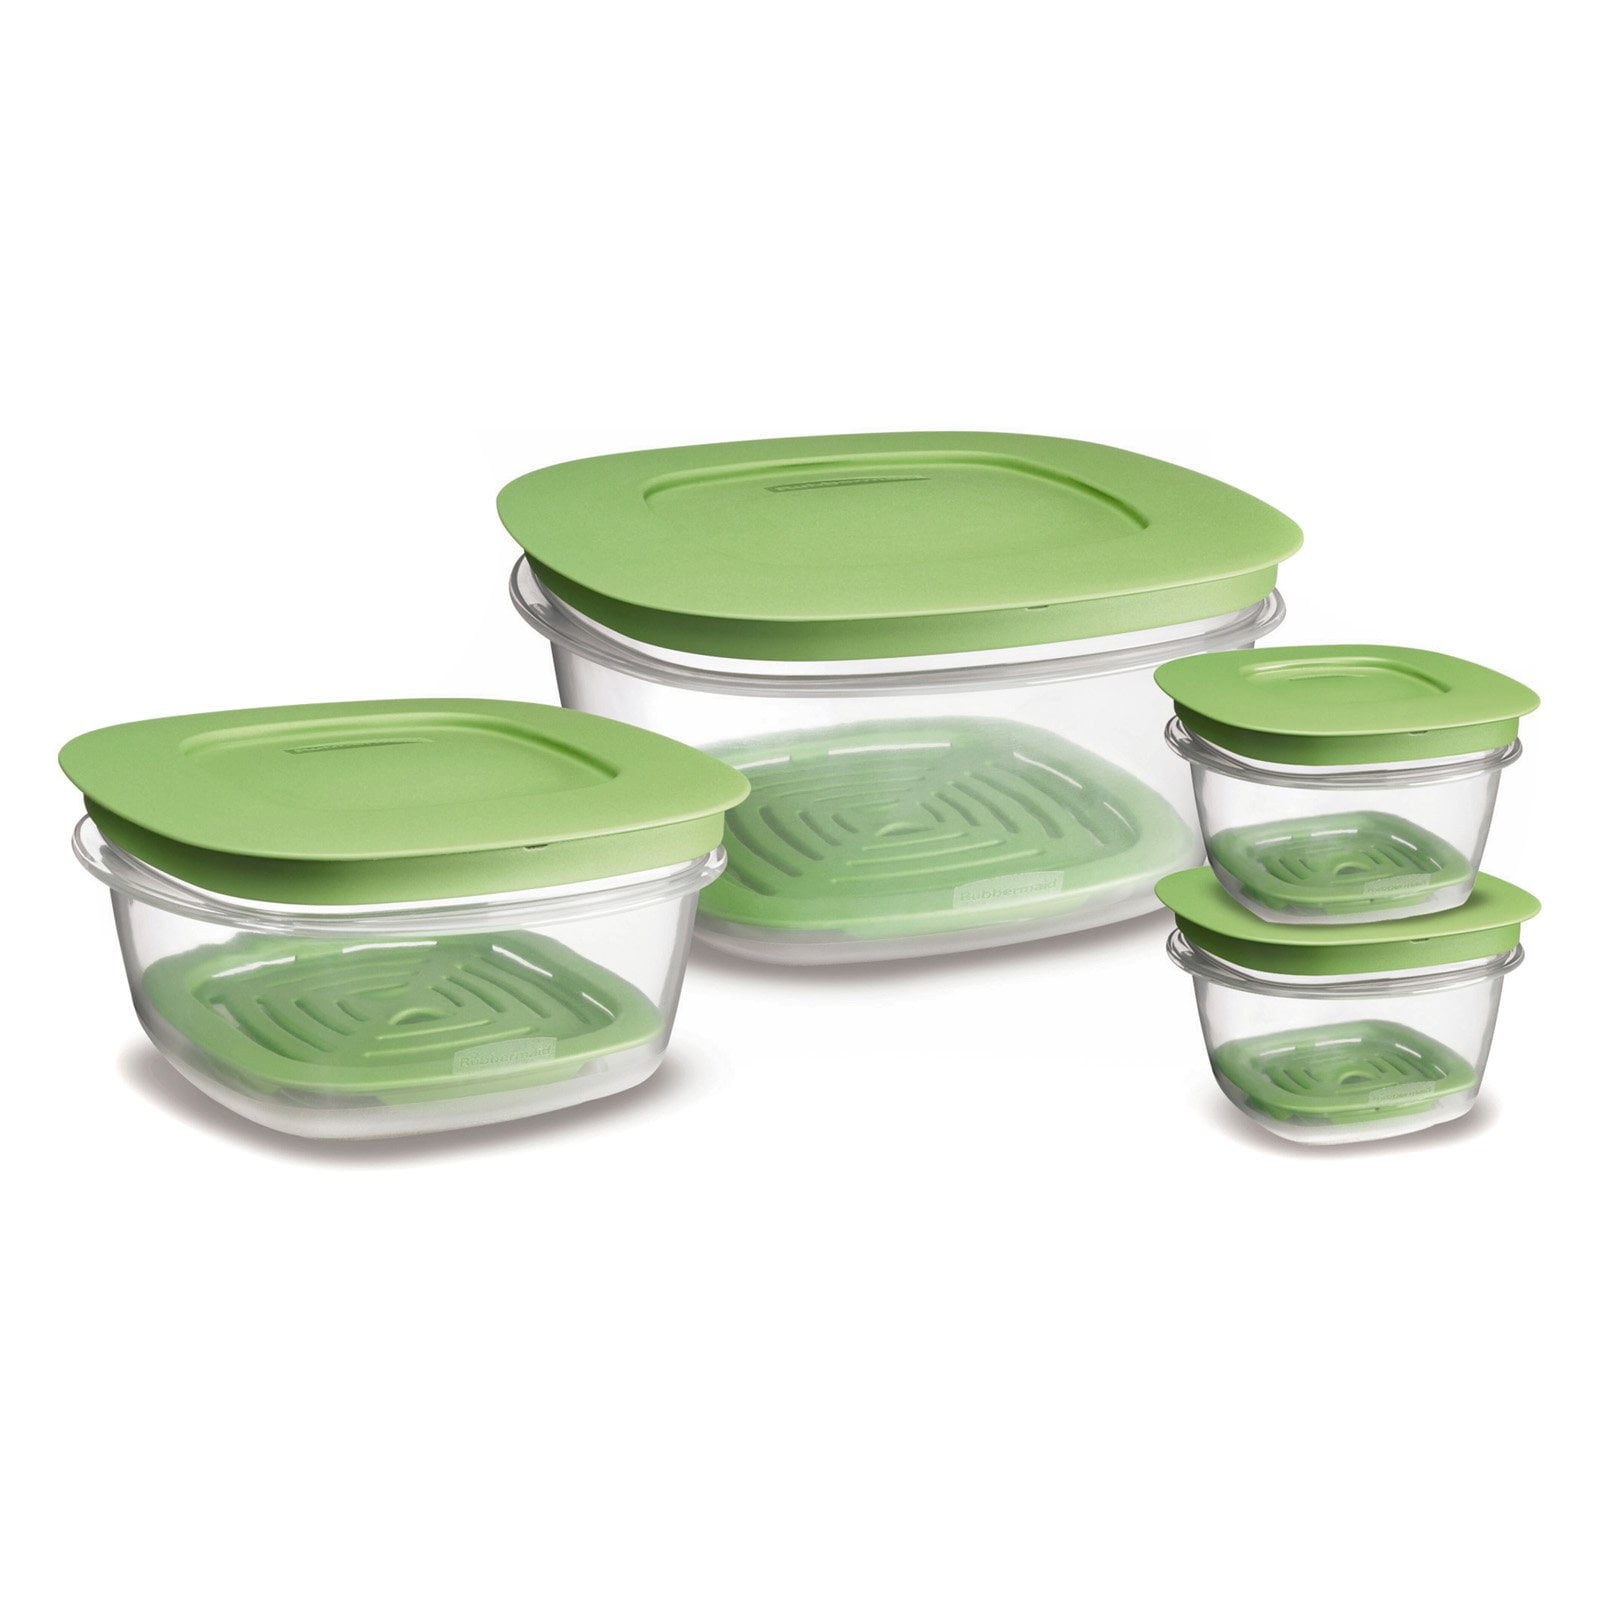 Rubbermaid Produce Saver Food Storage Container 14-Cup 